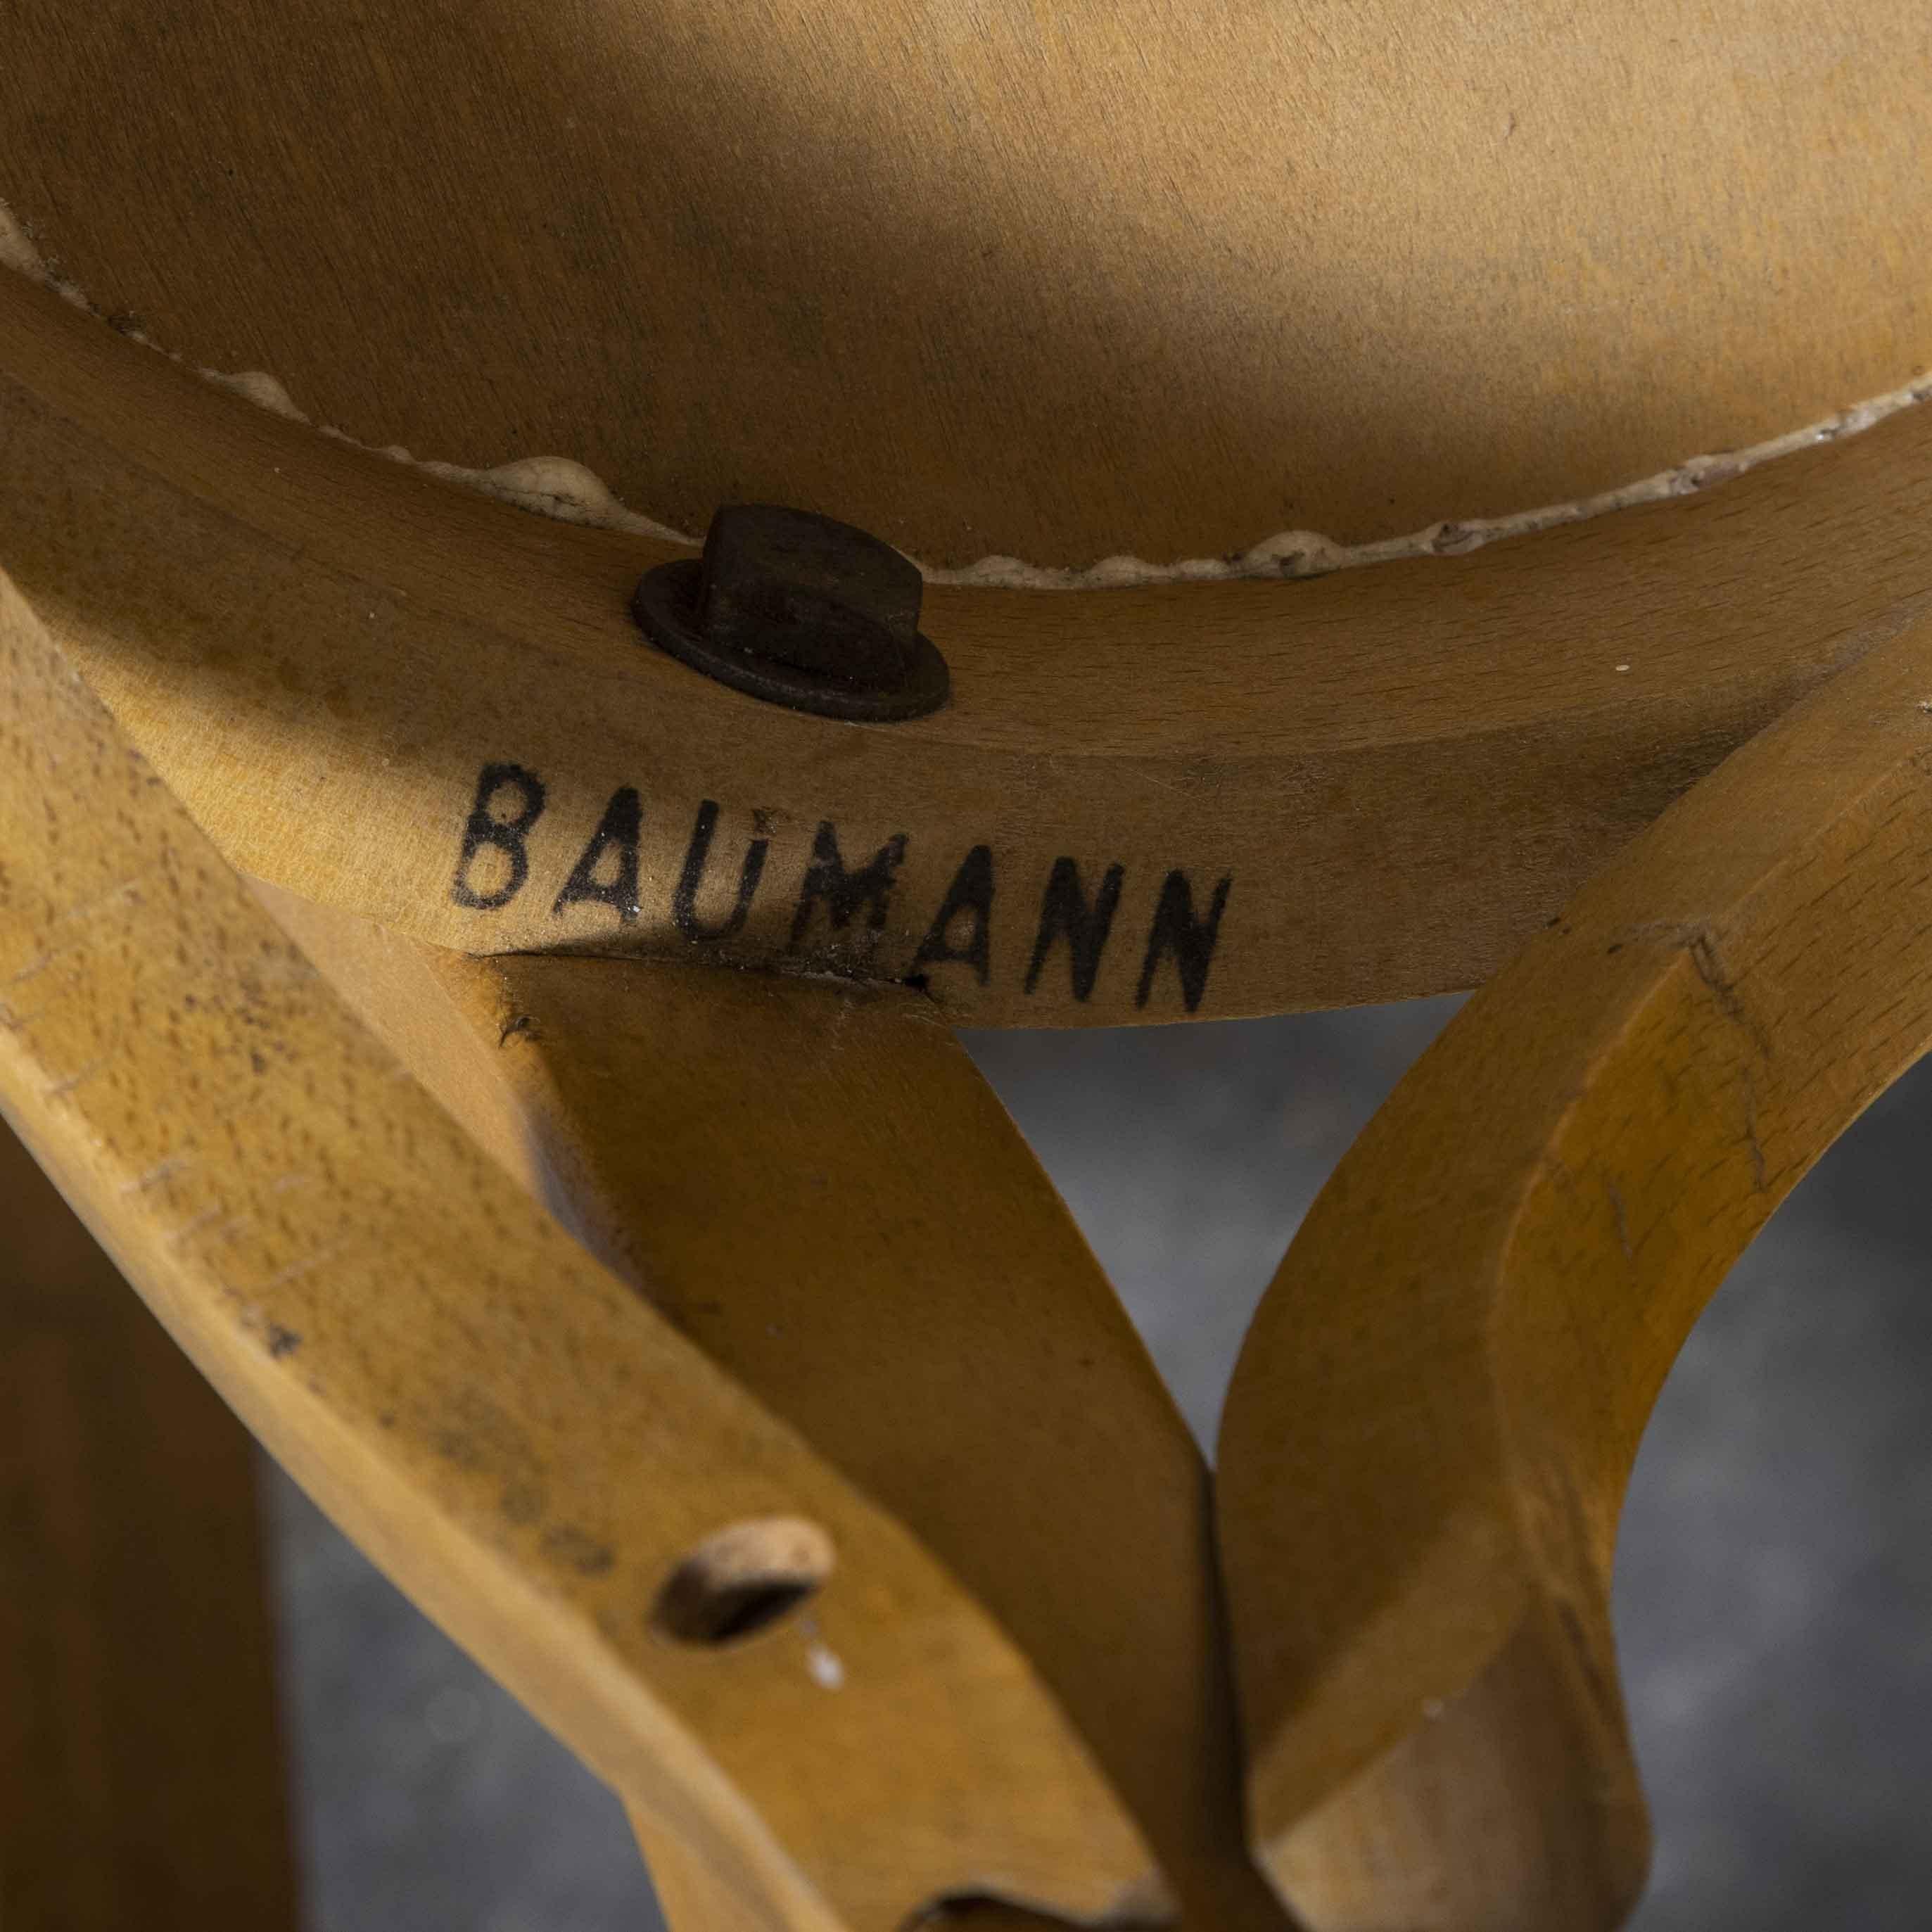 1950’s French Baumann blonde beech bentwood dining chairs – various quantities available

1950’s French Baumann blonde beech bentwood dining chairs – various quantities available. Baumann is a slightly off the radar French producer just starting